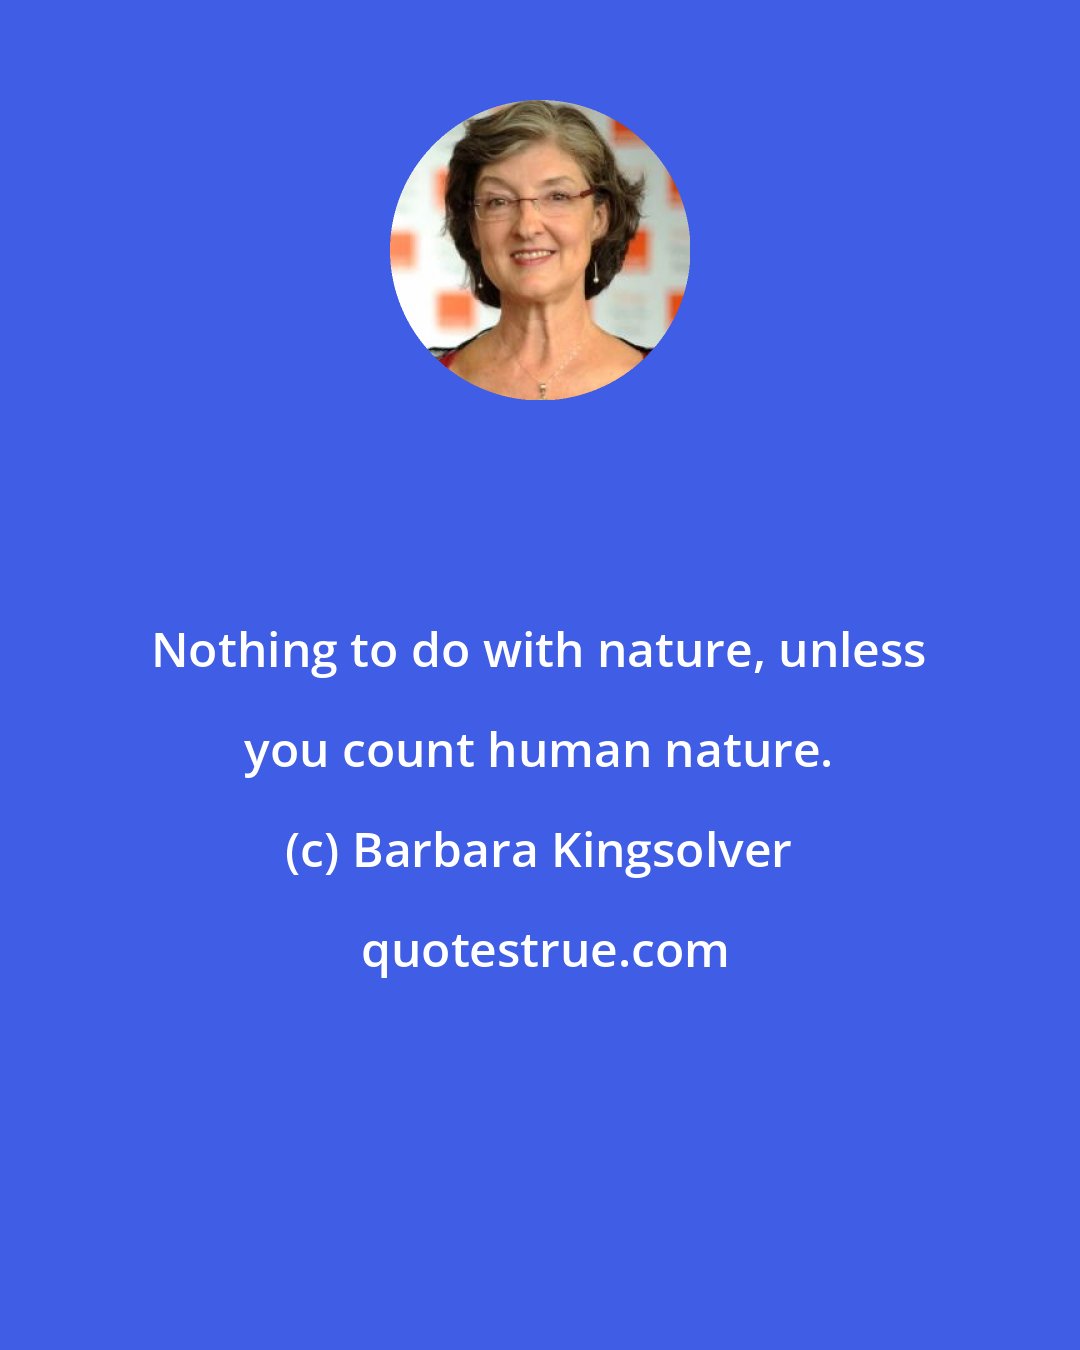 Barbara Kingsolver: Nothing to do with nature, unless you count human nature.